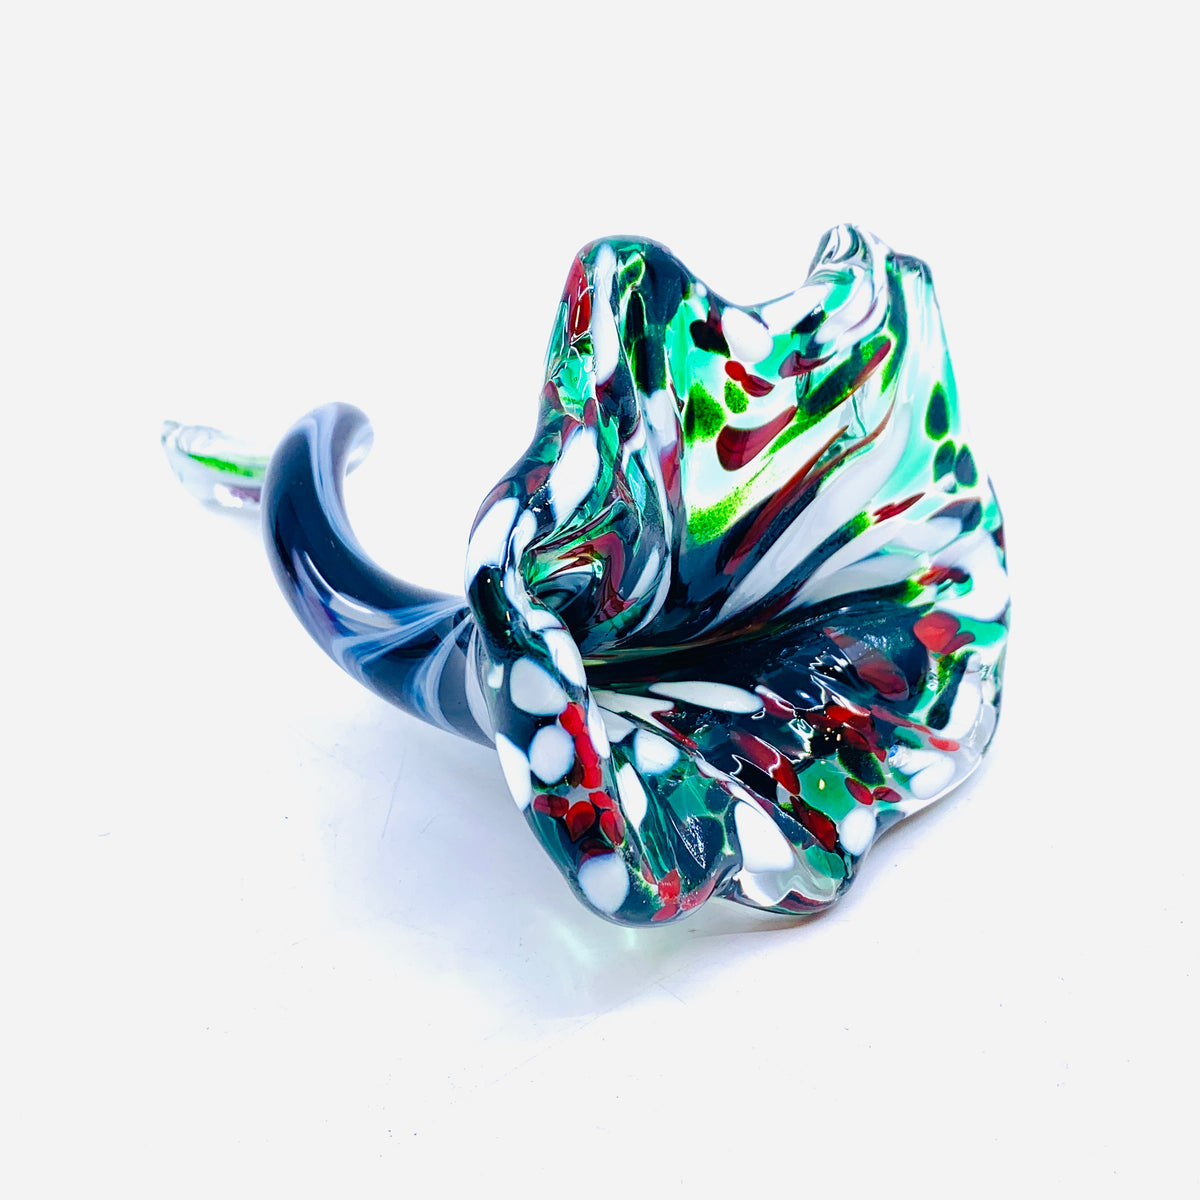 Pulled Glass Flower 556